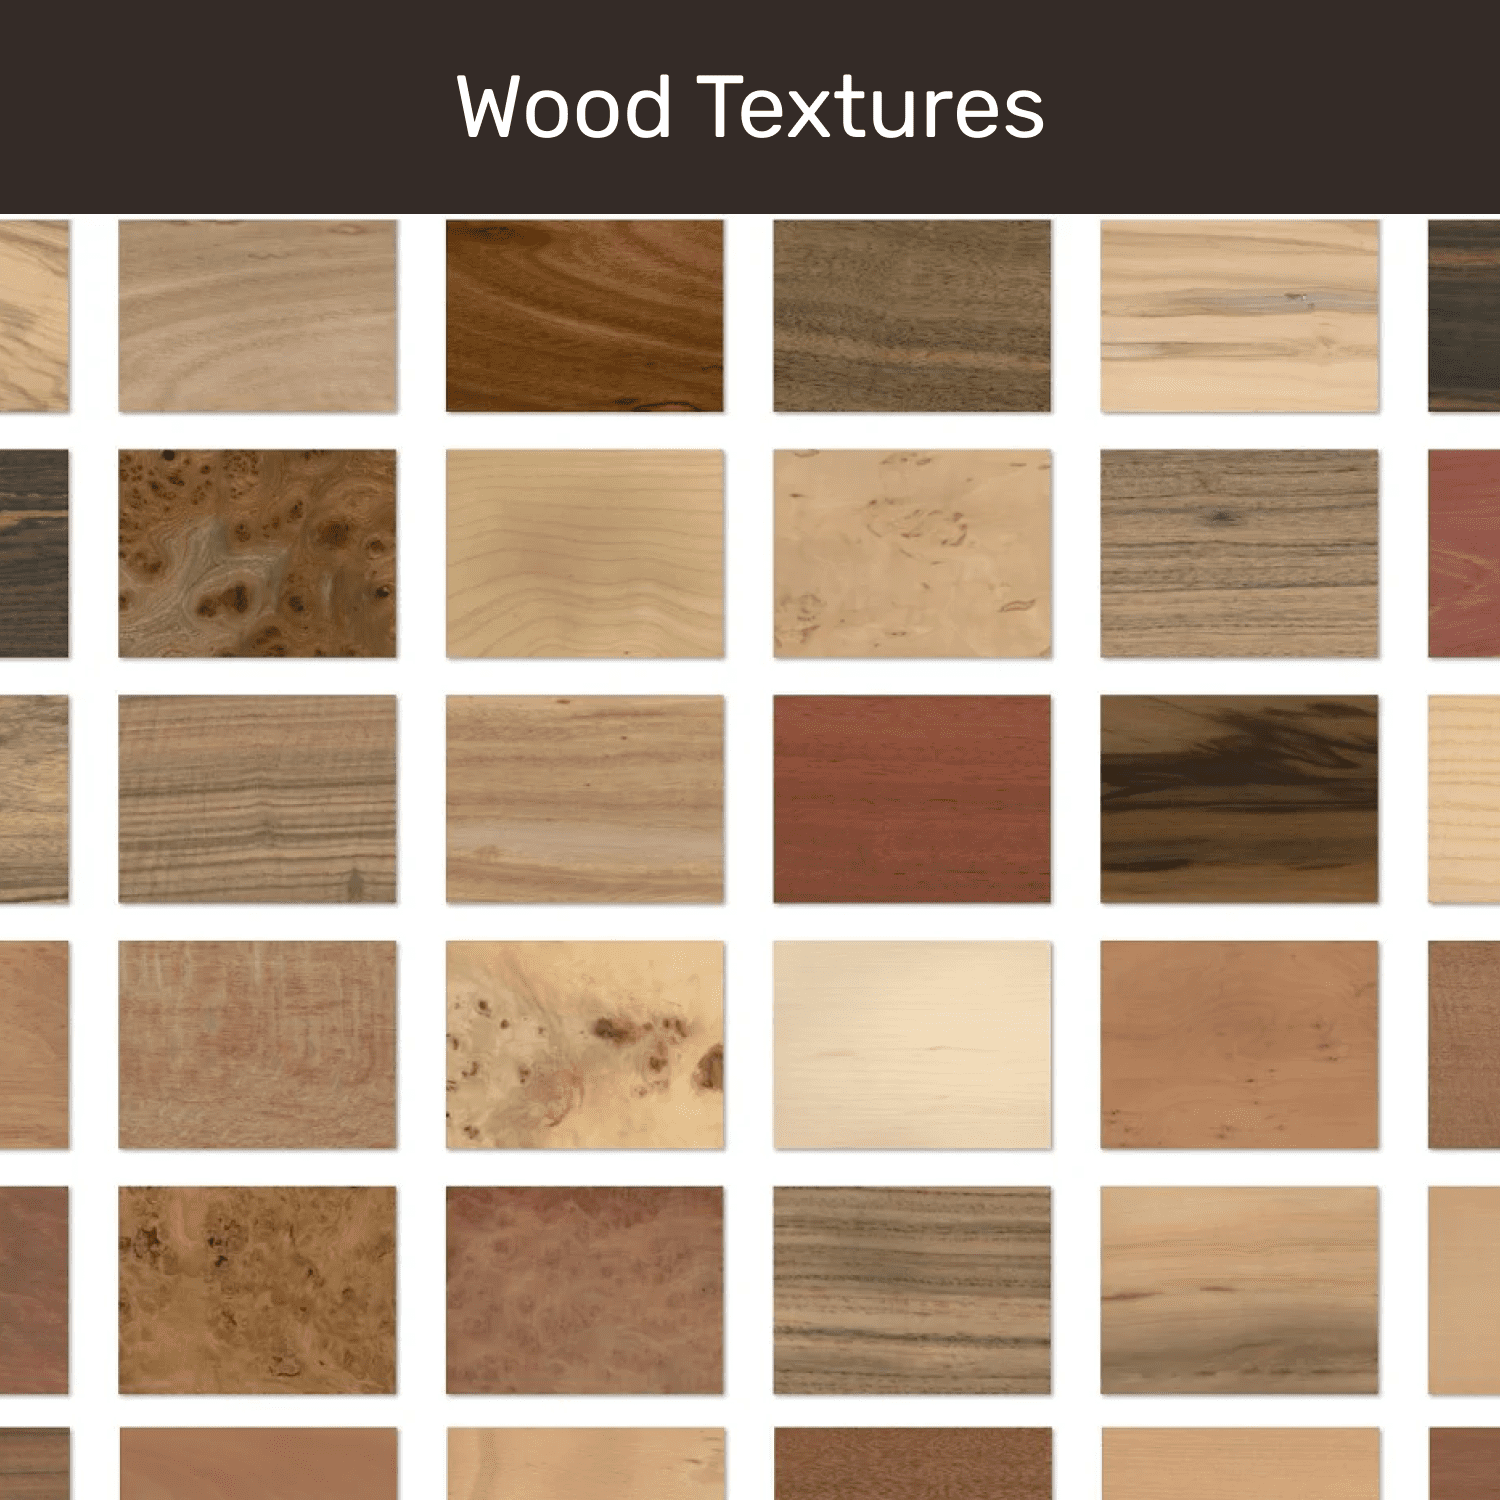 Wood Textures cover.